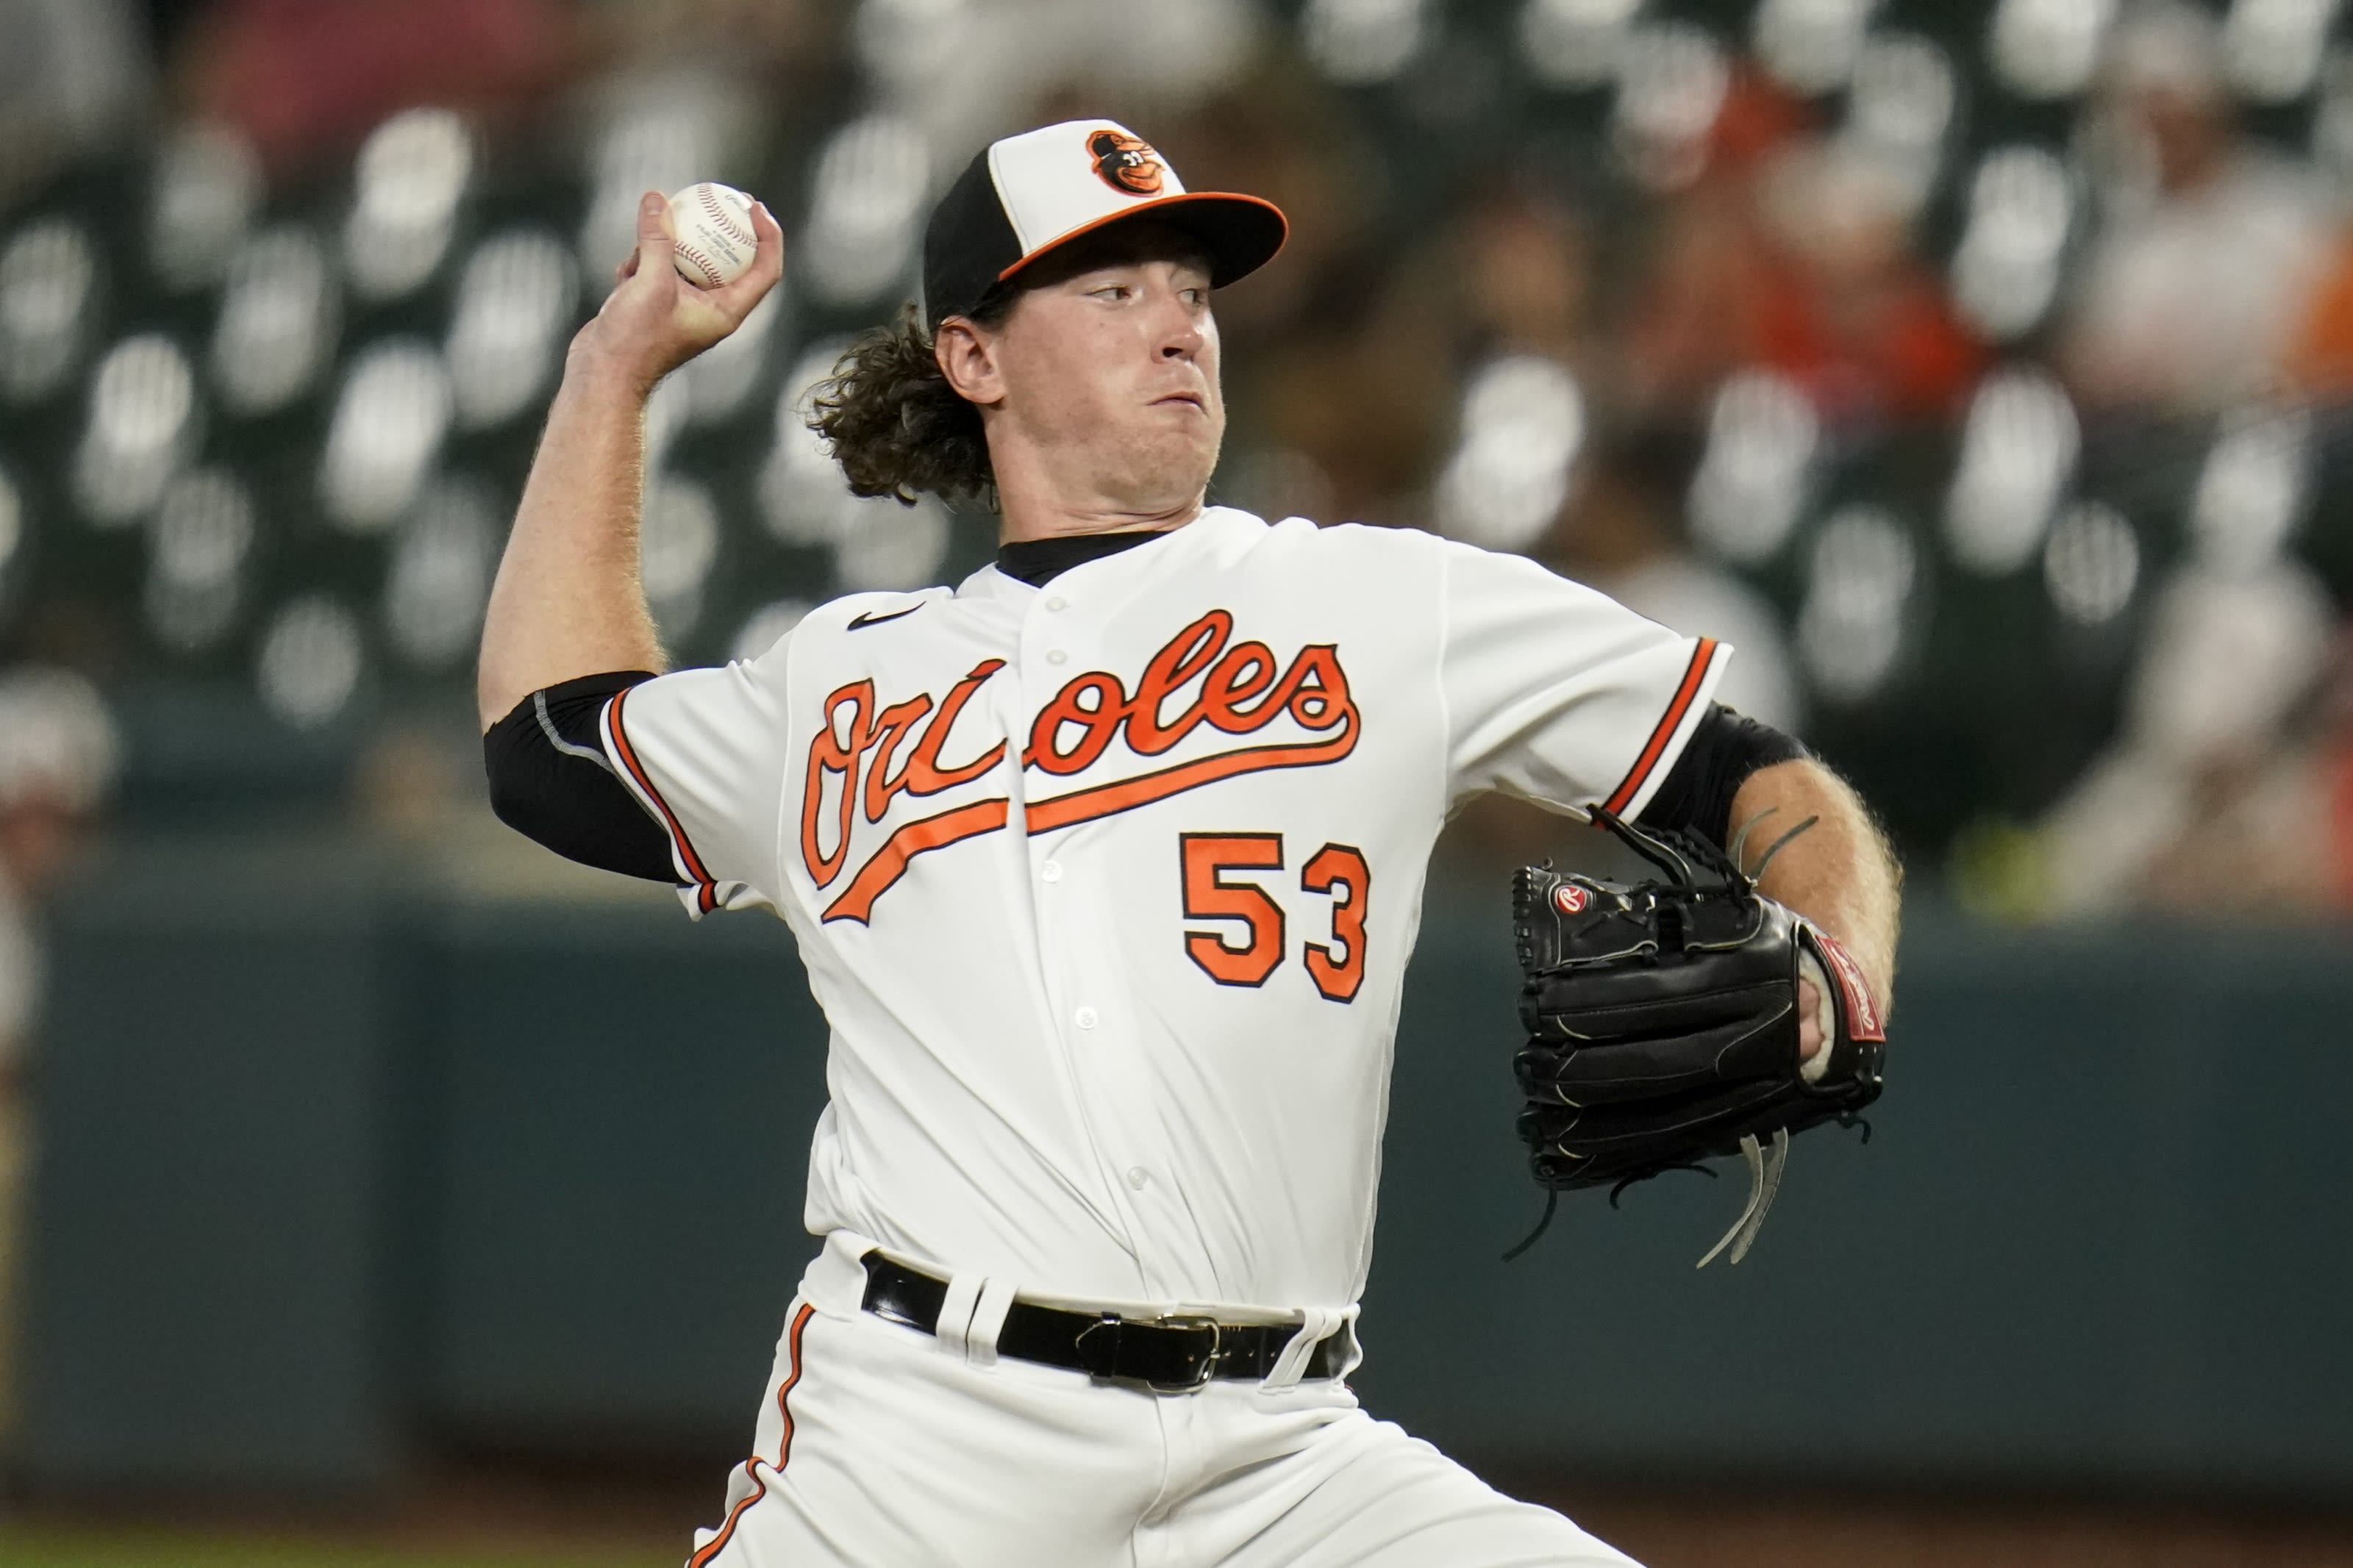 Orioles trade Mike Baumann and Michael Pérez to the Mariners for catcher Blake Hunt - WTOP News